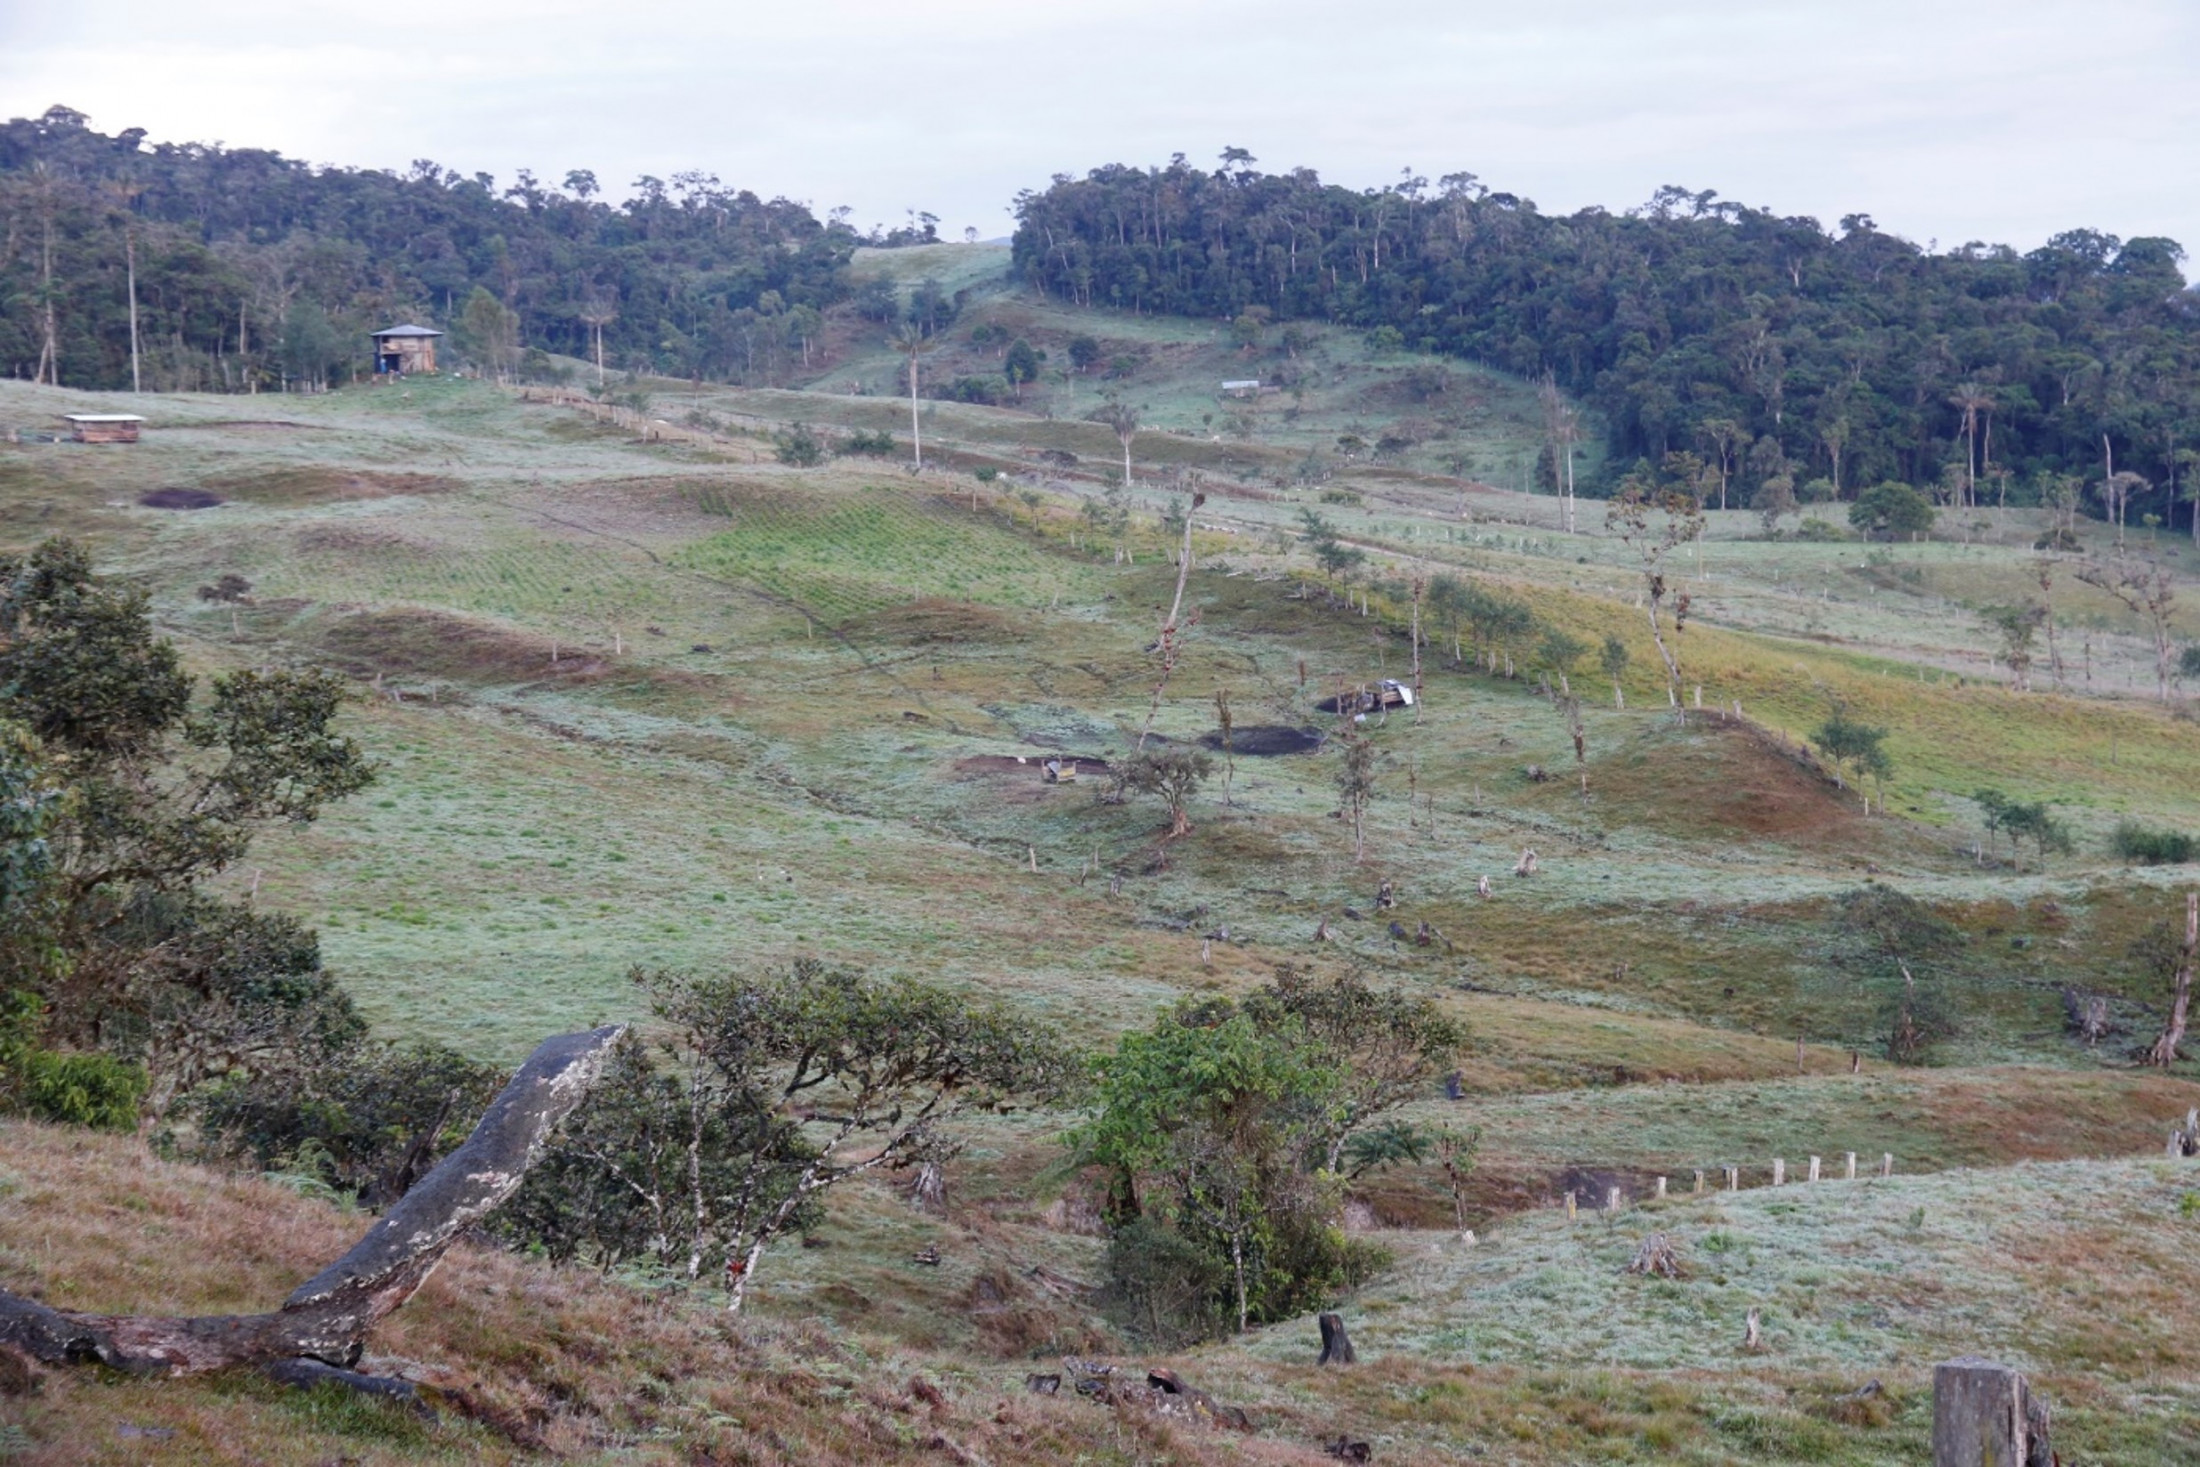 In a hilly landscape, various plants such as young trees and crops are planted in rows. There is forest in the back, while the foreground is mostly open field.